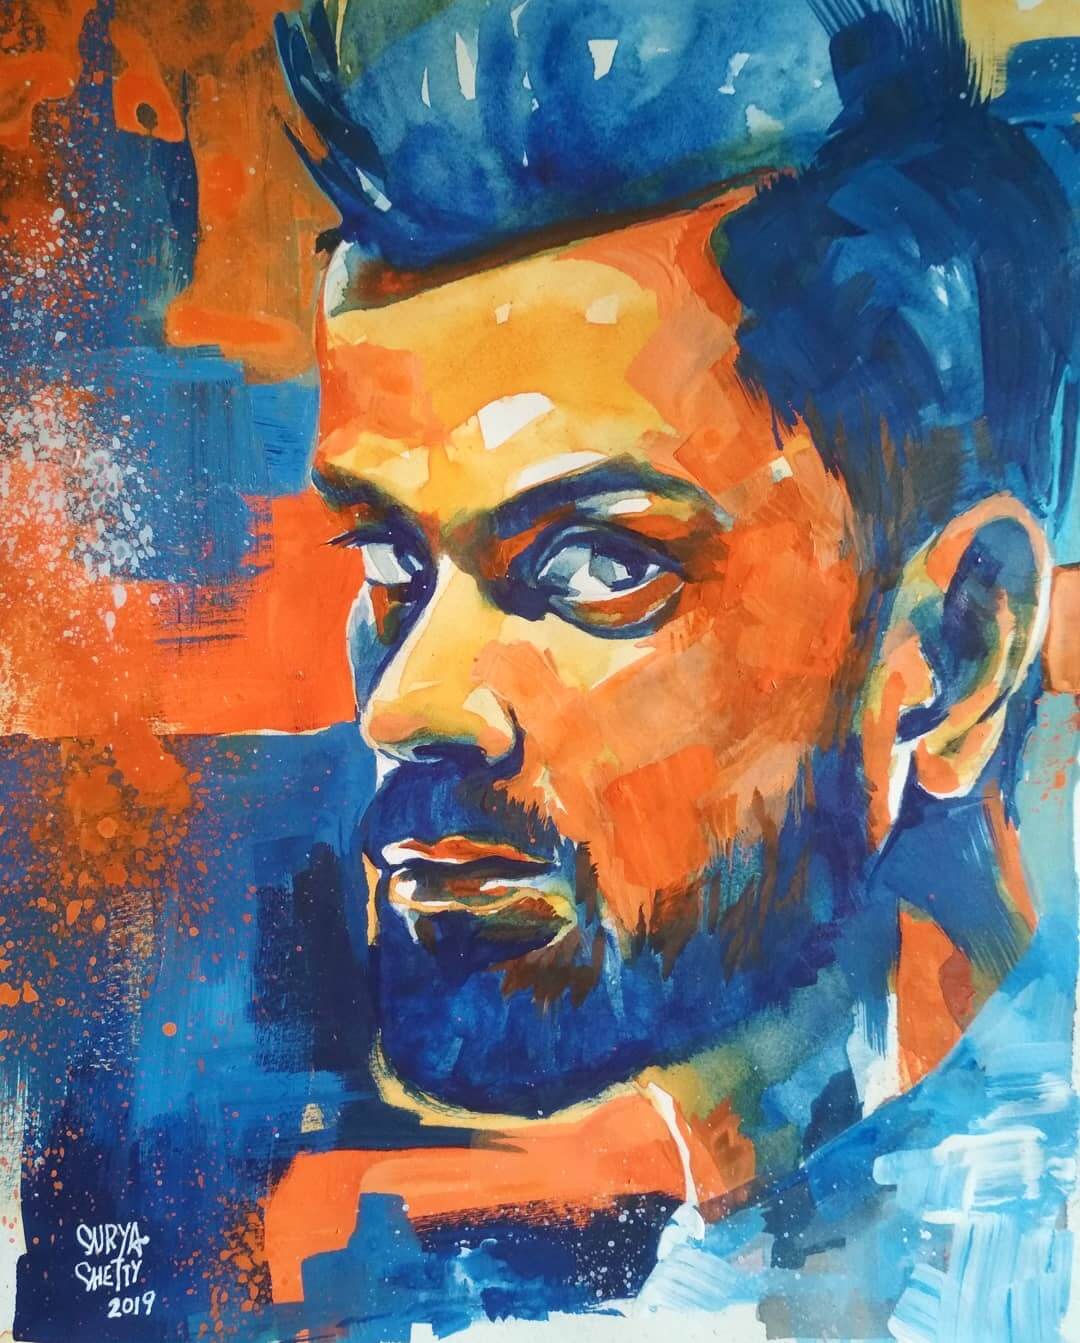 How To Draw Virat Kohli Detailed Step By Step Tutorial For Beginners  @AjArts03 - YouTube